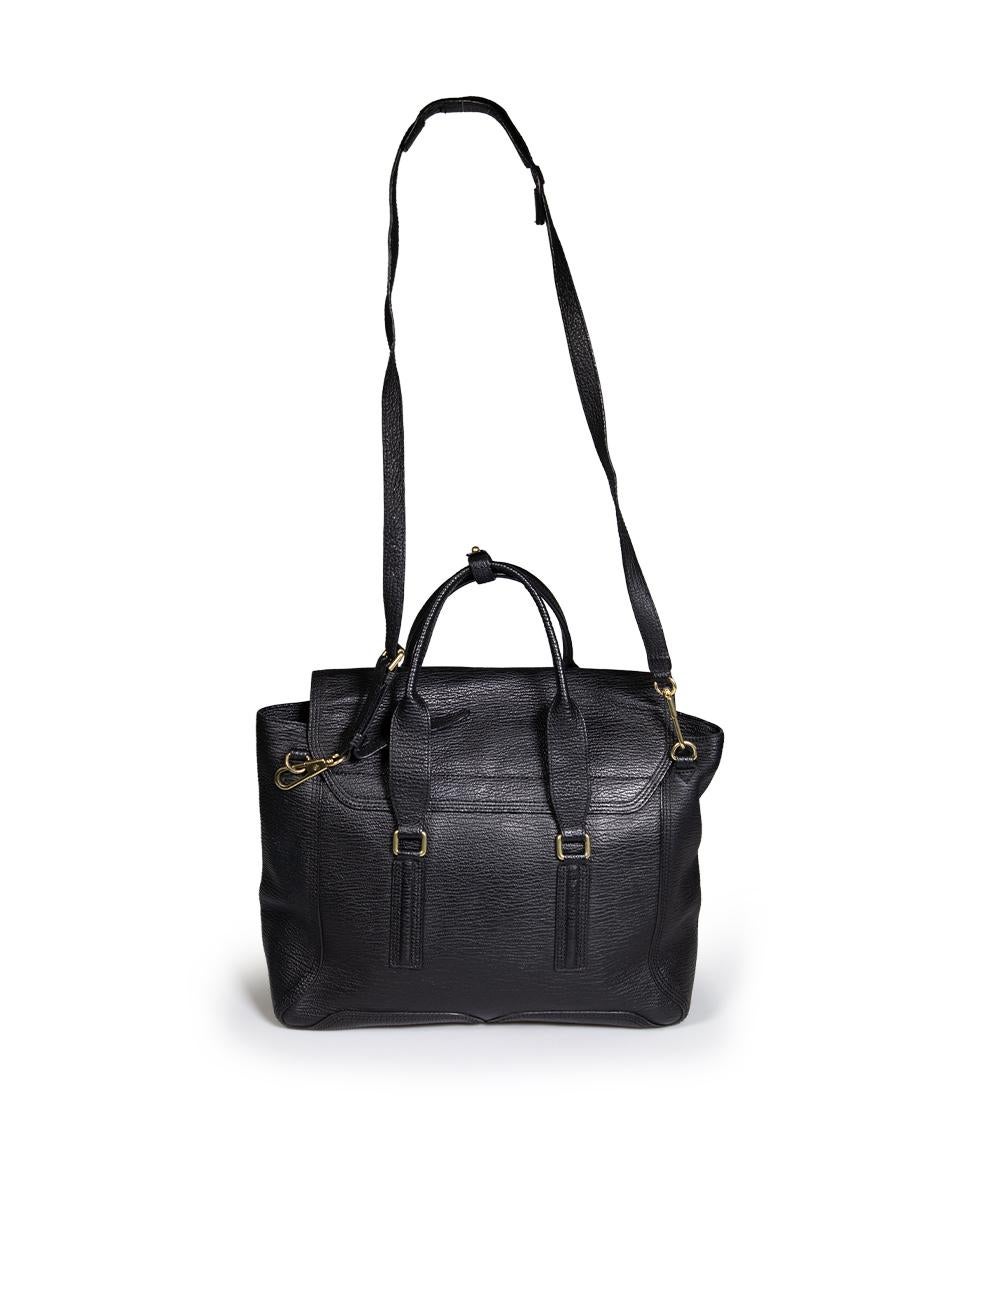 3.1 Phillip Lim Black Leather Pashli Zip Detailed Satchel In Excellent Condition For Sale In London, GB